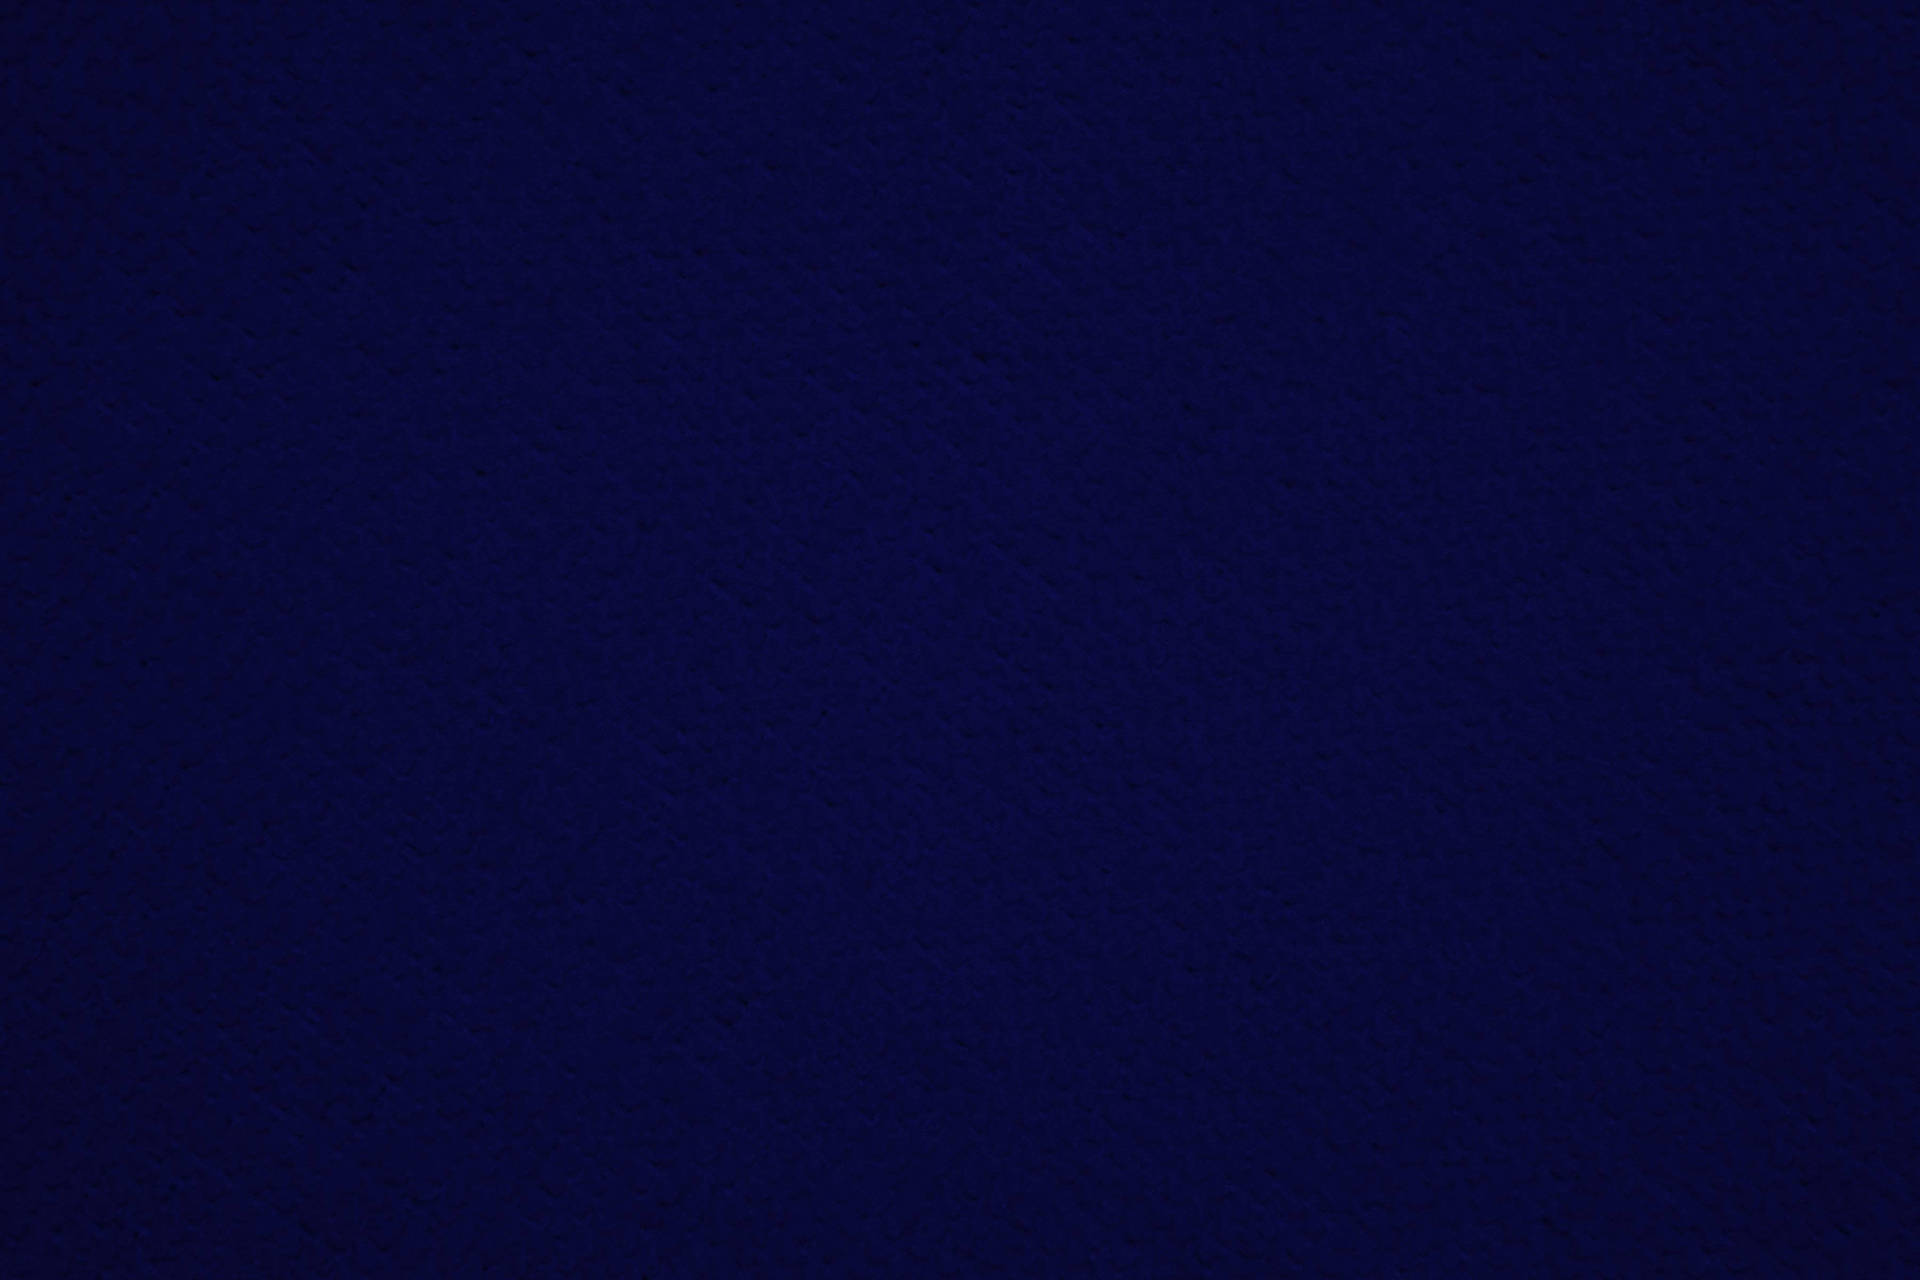 solid navy blue background